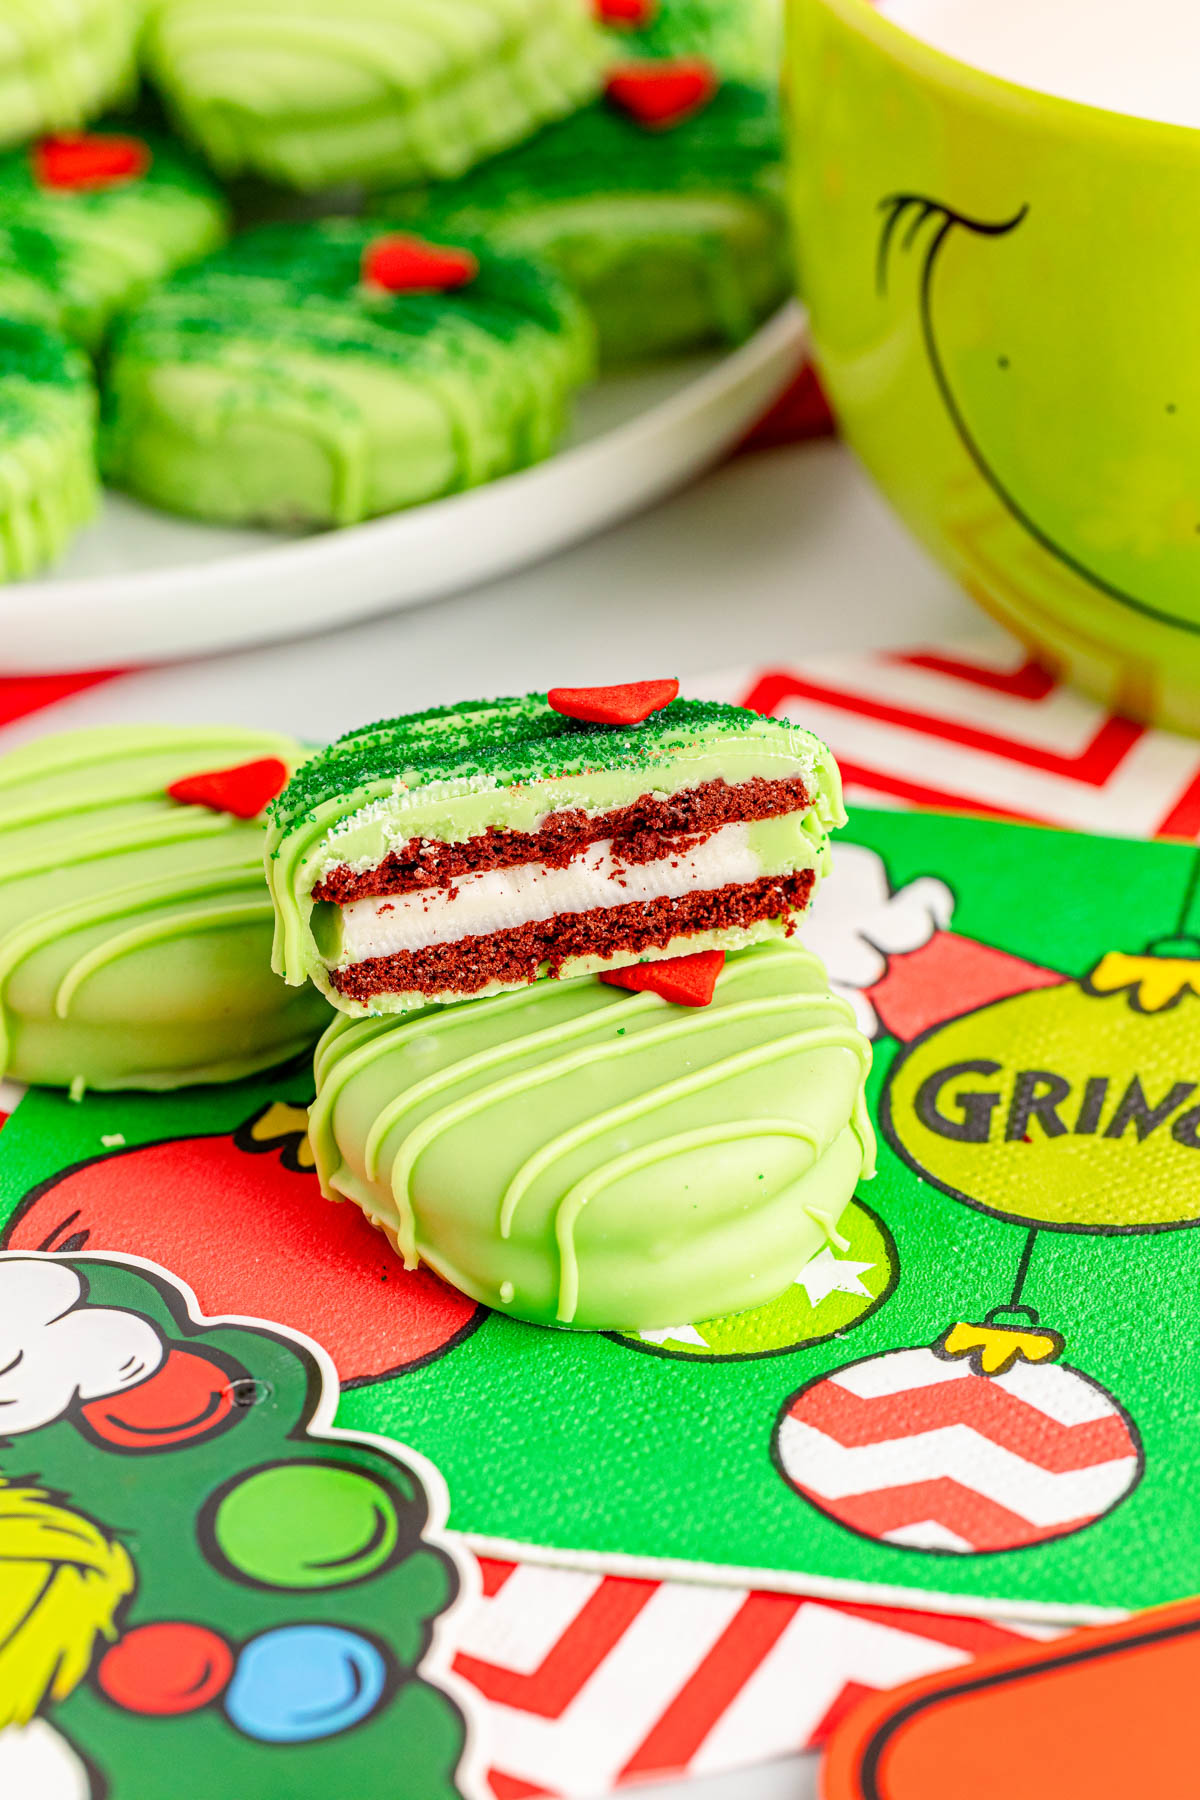 Grinch cookies on a table next to a mug